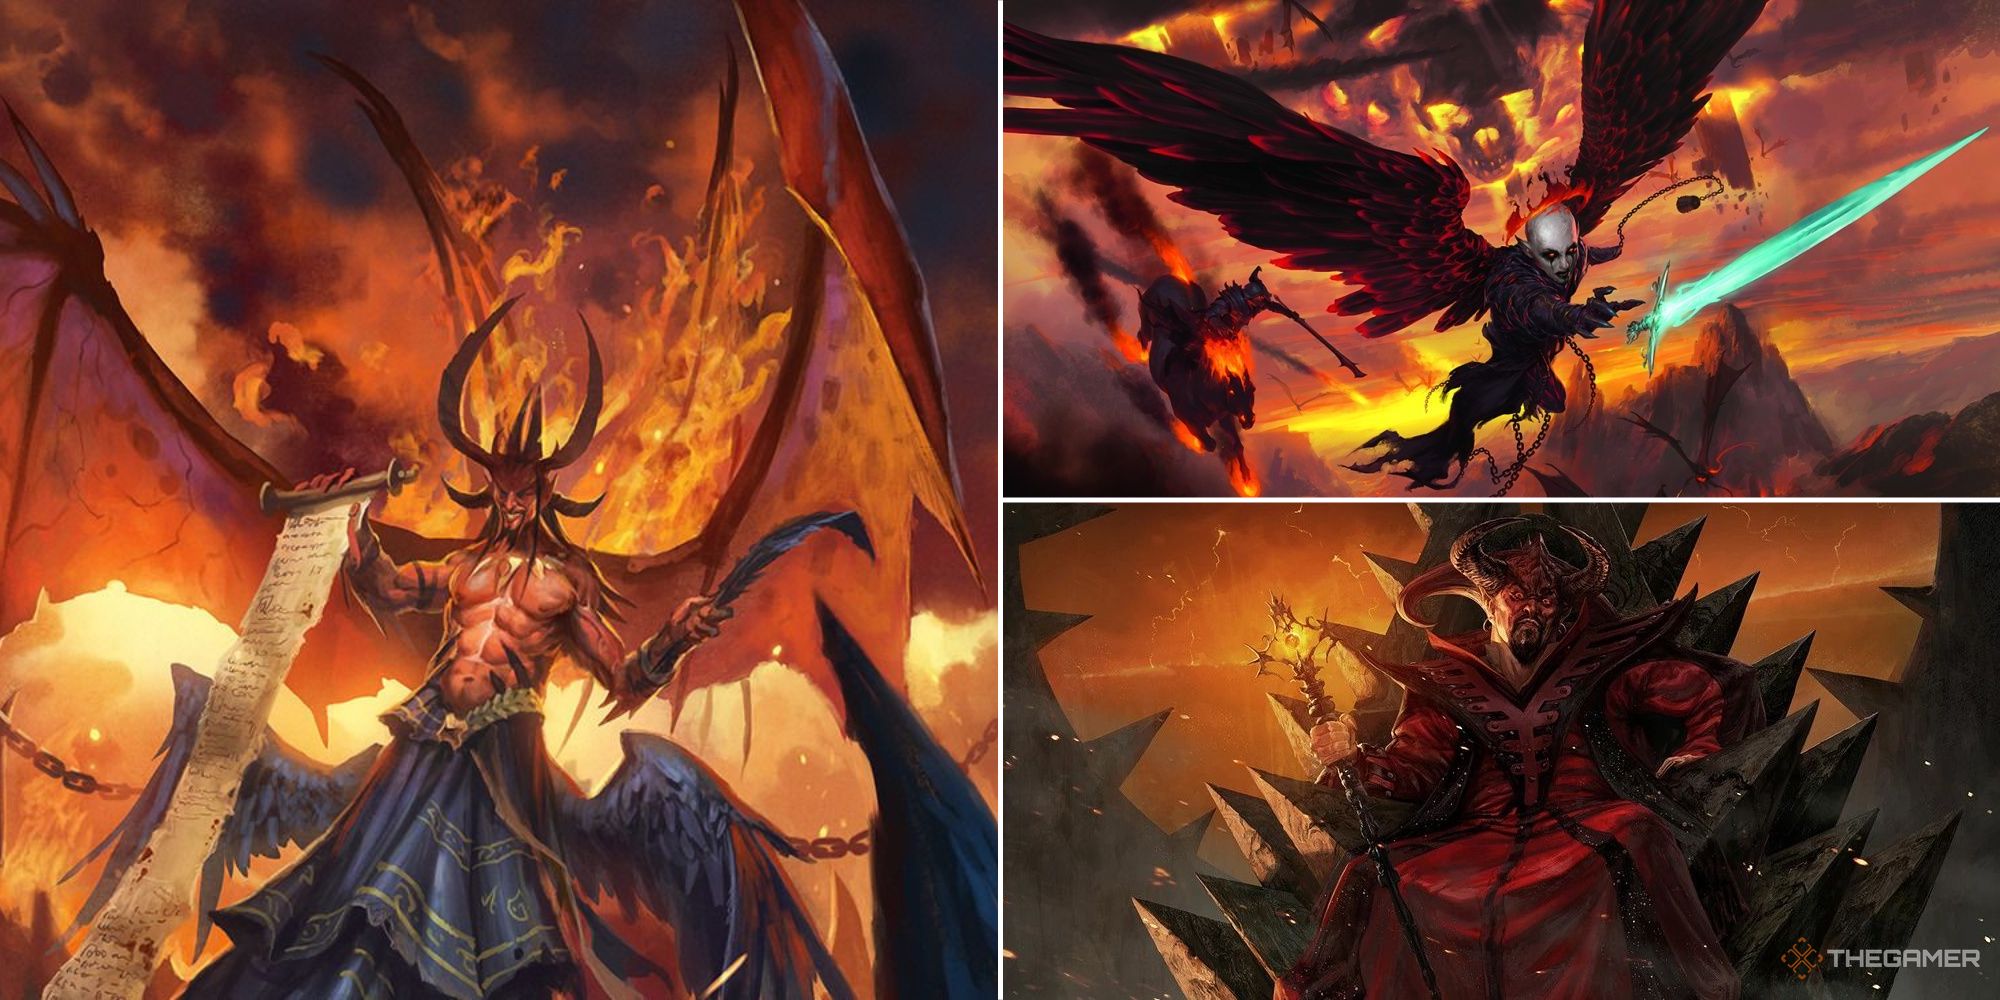 The archdevils Mephistopheles, Zariel, and Asmodeus in Dungeons & Dragons